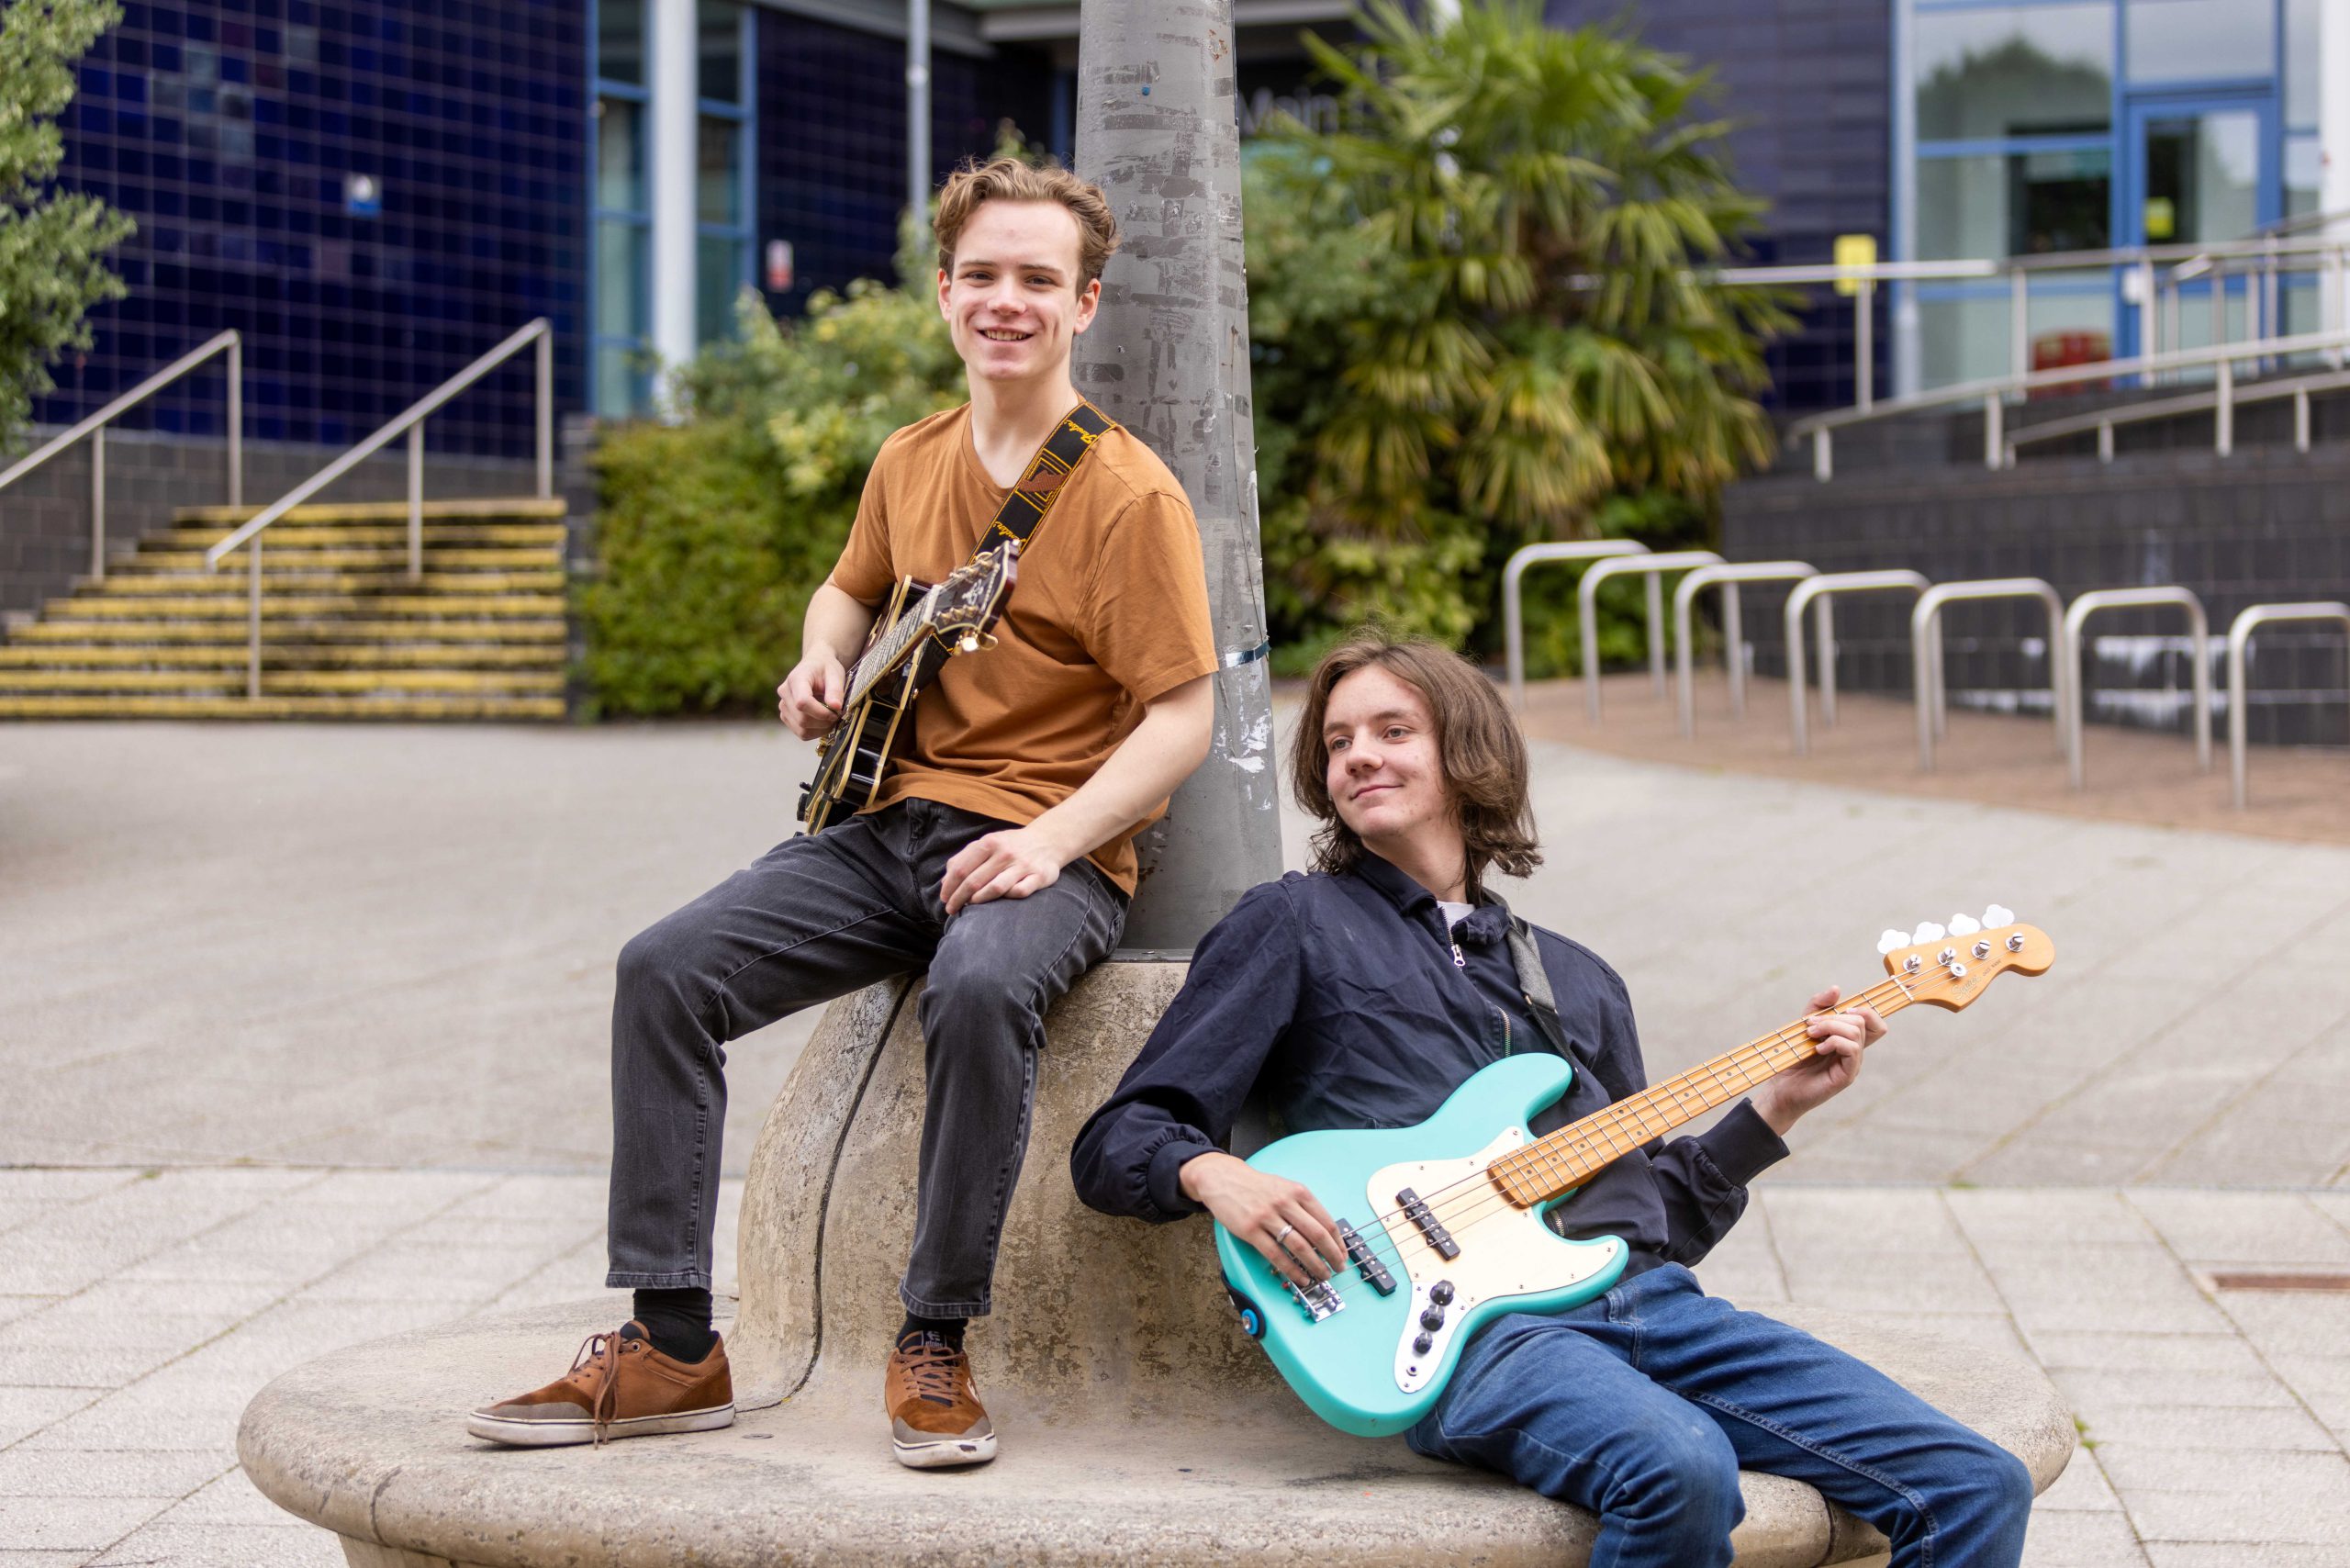 Owen and Dec;and holding their guitars outside of The Joseph Wright Centre.